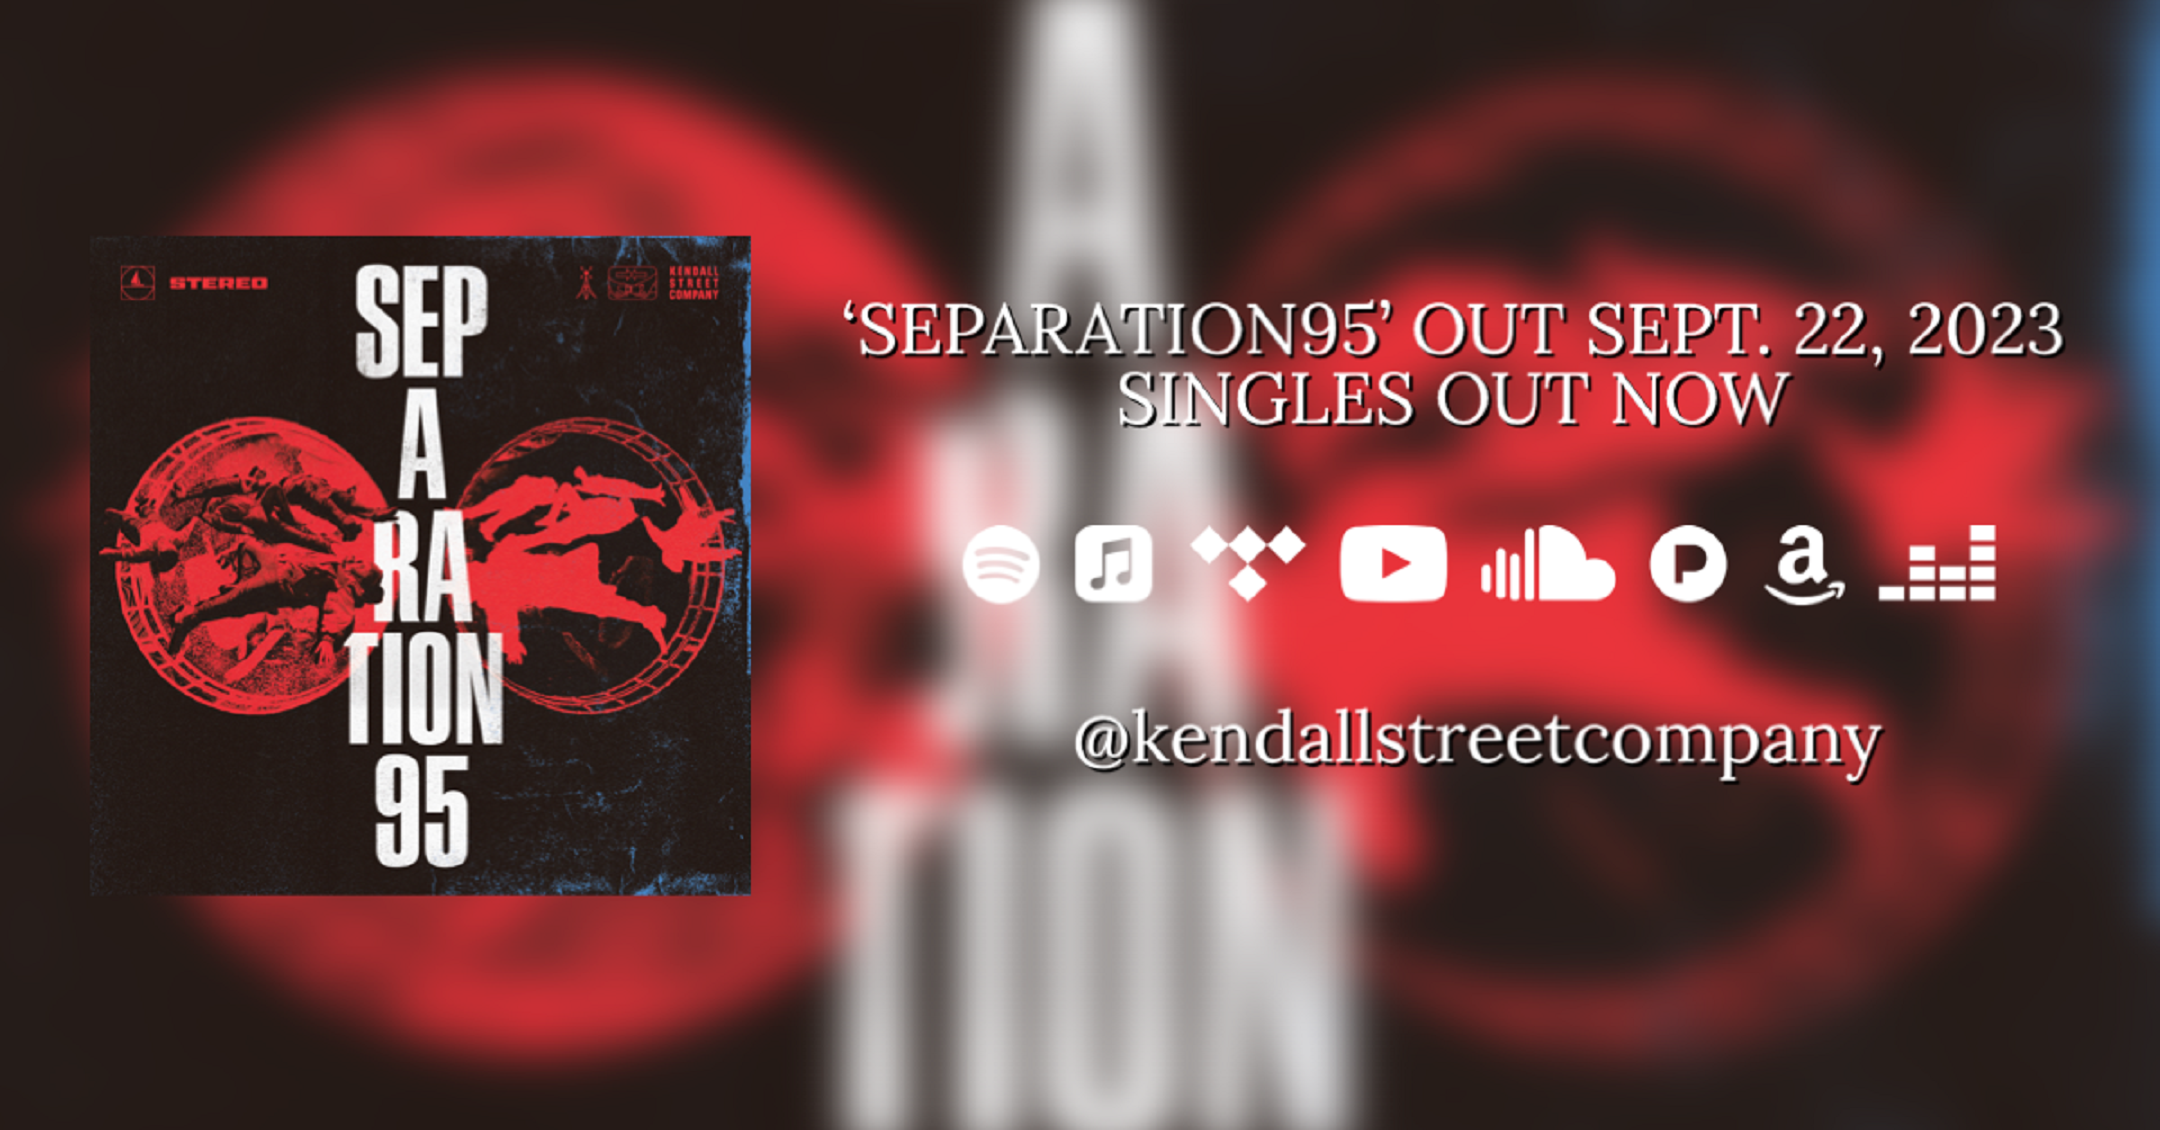 Kendall Street Company Releases Third Single and Music Video for "Excusezmoi" from Upcoming Album Separation95